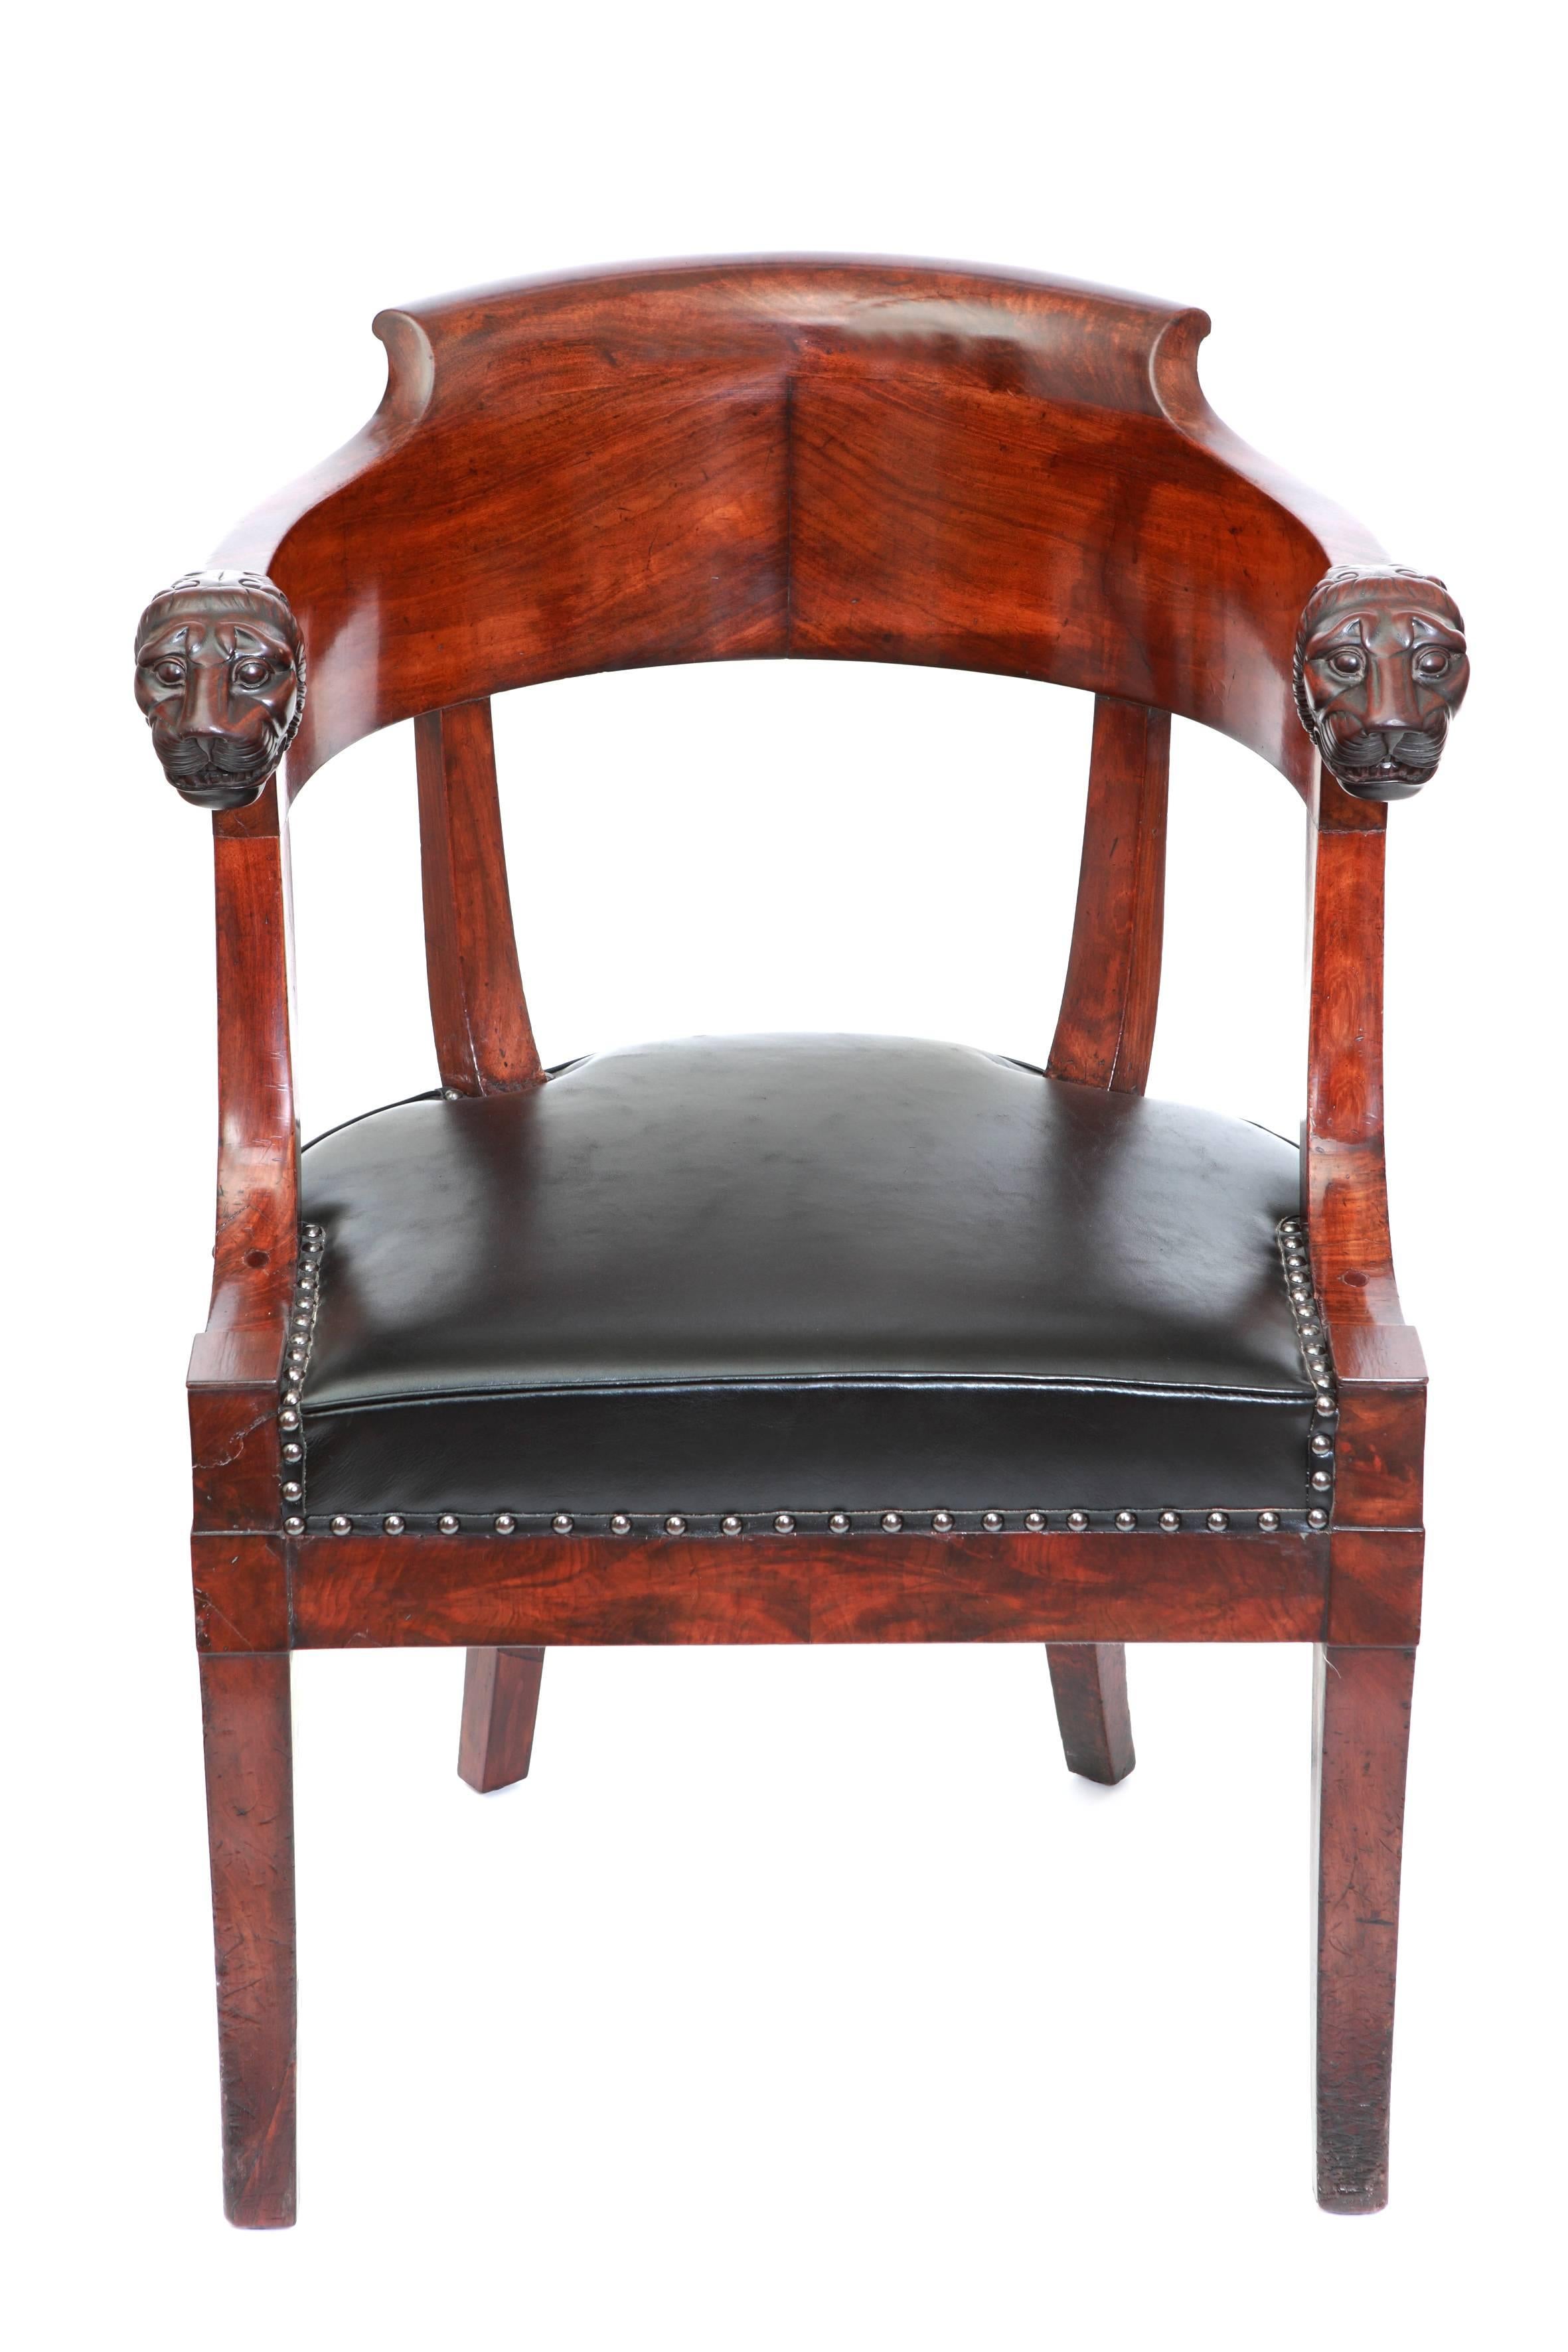 Gondola shaped office chair with armrests ending in lion heads.

Mahogany gondola shaped office chair with upholstery in black leather lined with a spiked border. The armrests are ending in a carved lion’s head. 

Mahogany, black leather